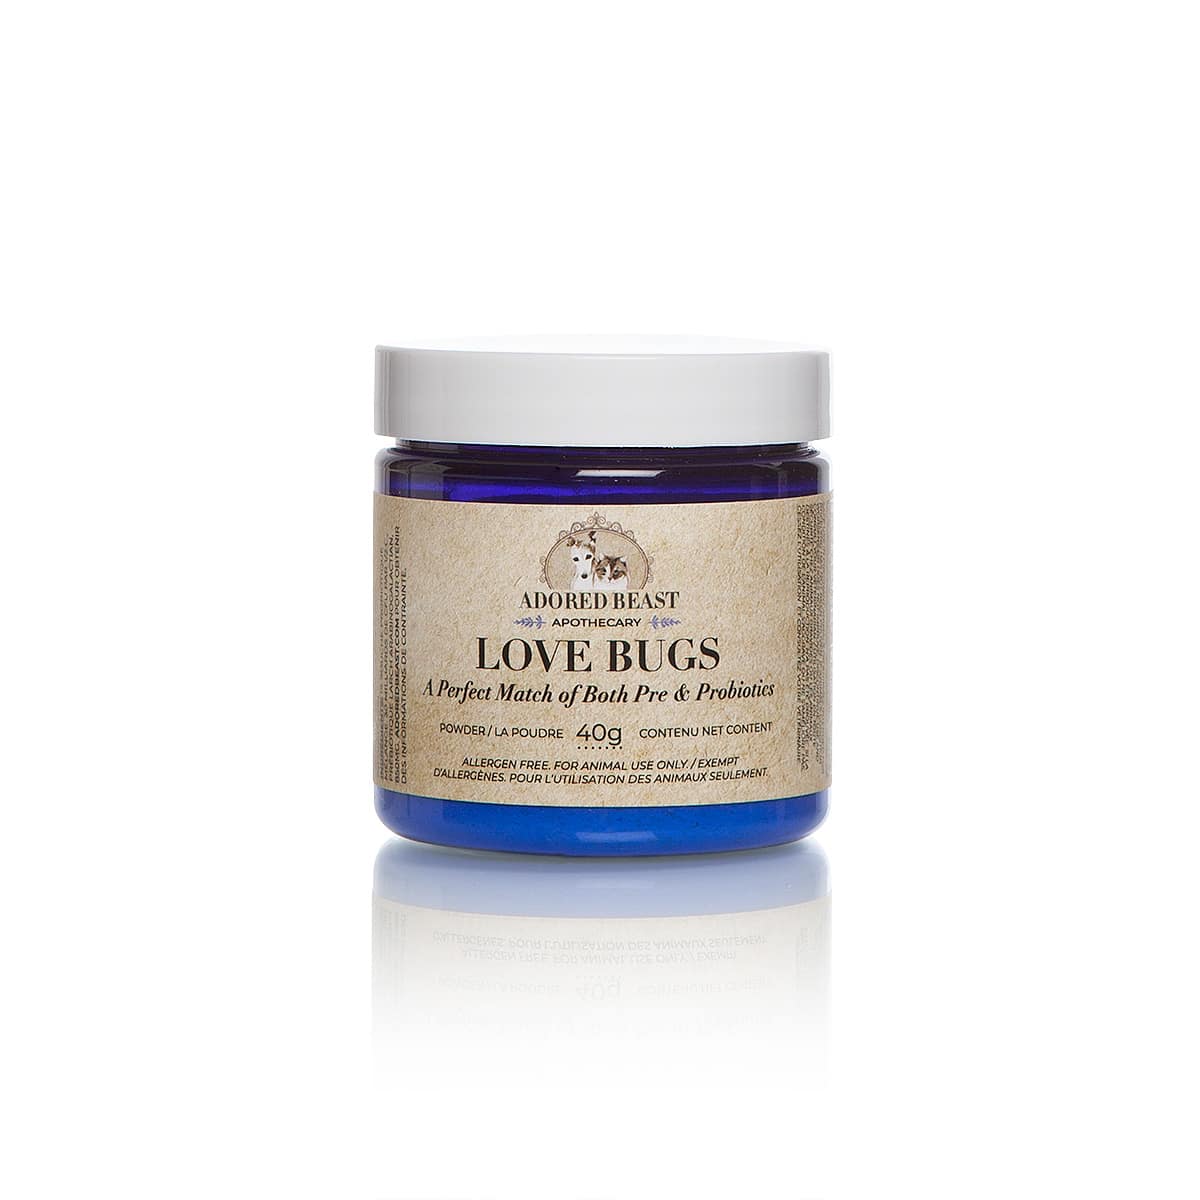 Love Bugs - Adored Beast Apothecary